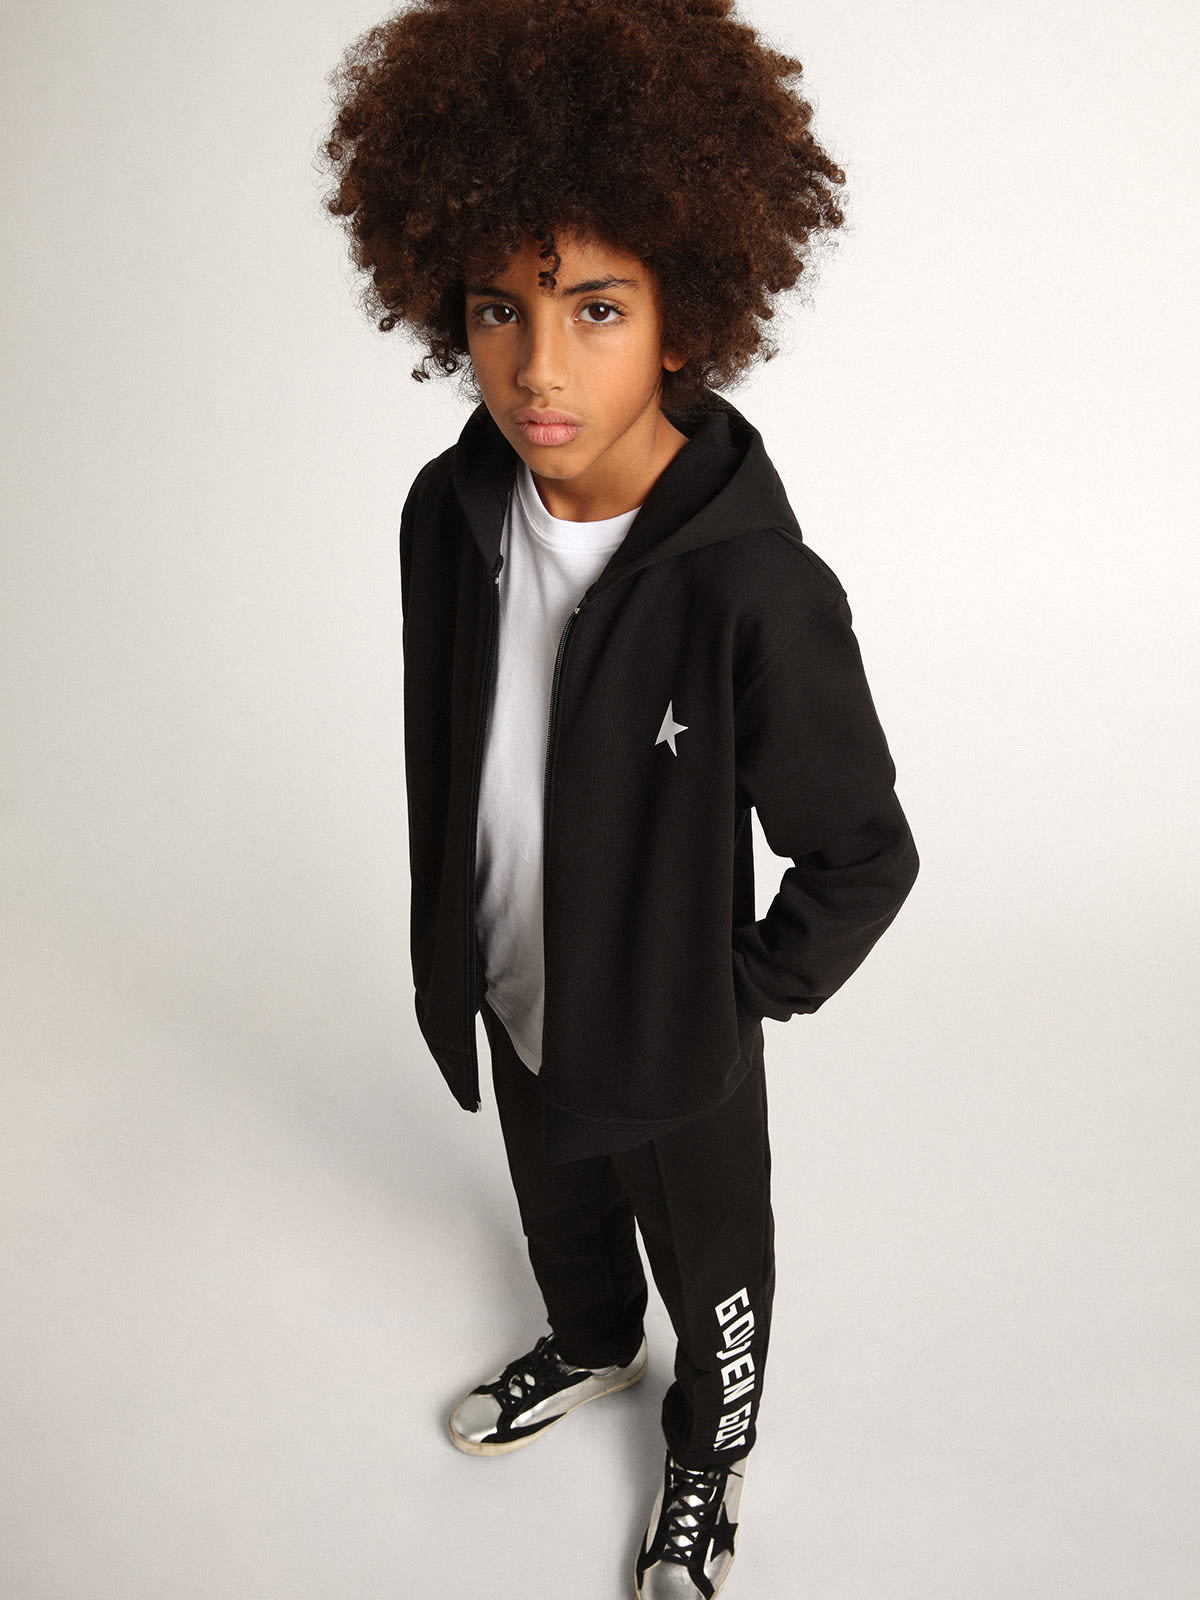 Golden Goose - Black hooded sweatshirt with contrasting white star and logo in 